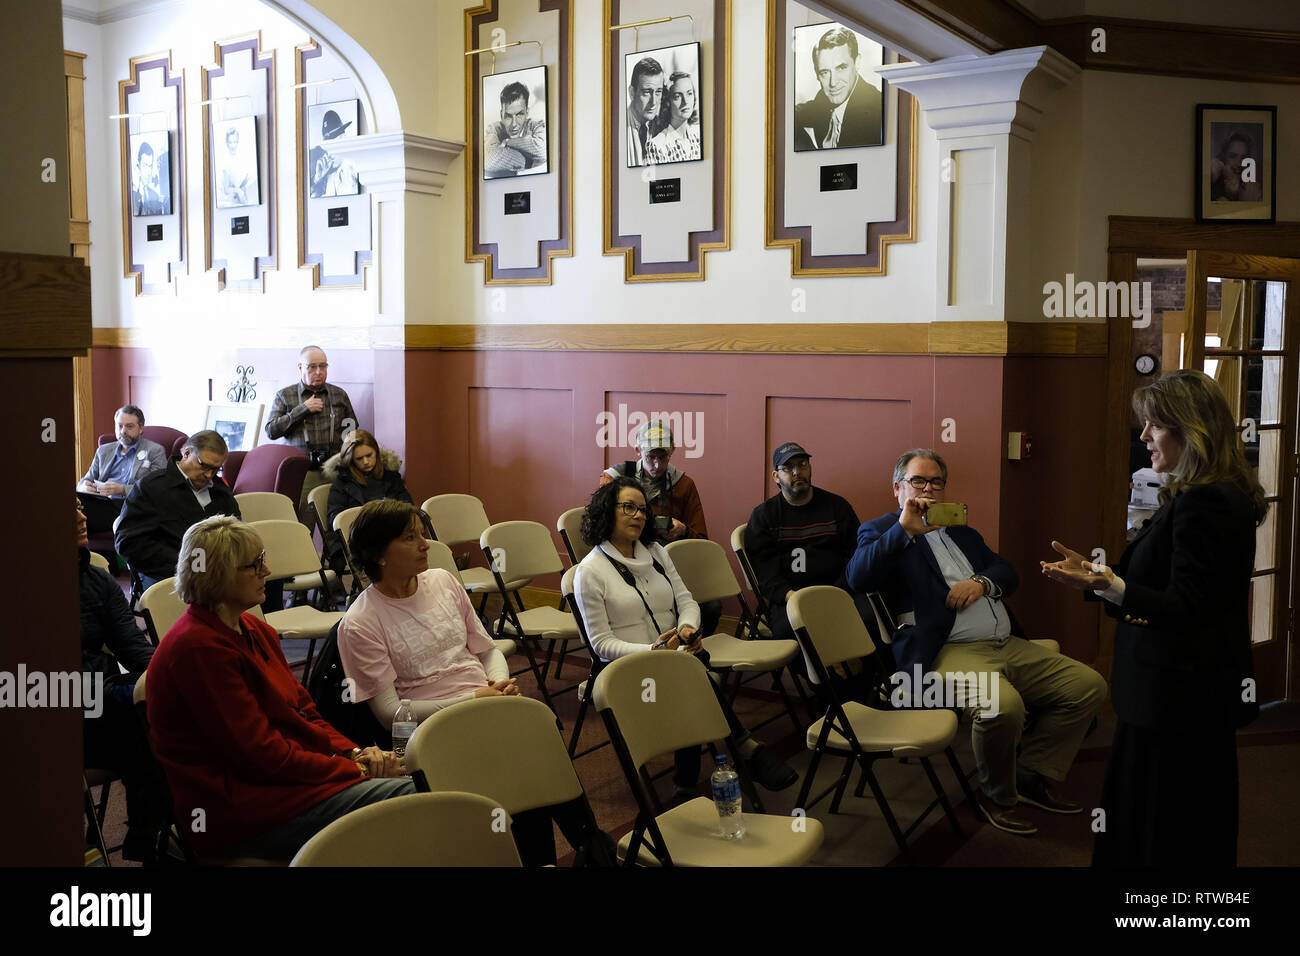 Denison, IOWA, USA. 2nd Mar, 2019. Author and spiritual guru MARIANNE WILLIAMSON speaks at the Donna Reed Theatre and talks about poverty in America, in Denison, Iowa Saturday, March 2, 2018, while exploring a presidential run for 2020. Credit: Jerry Mennenga/ZUMA Wire/Alamy Live News Stock Photo